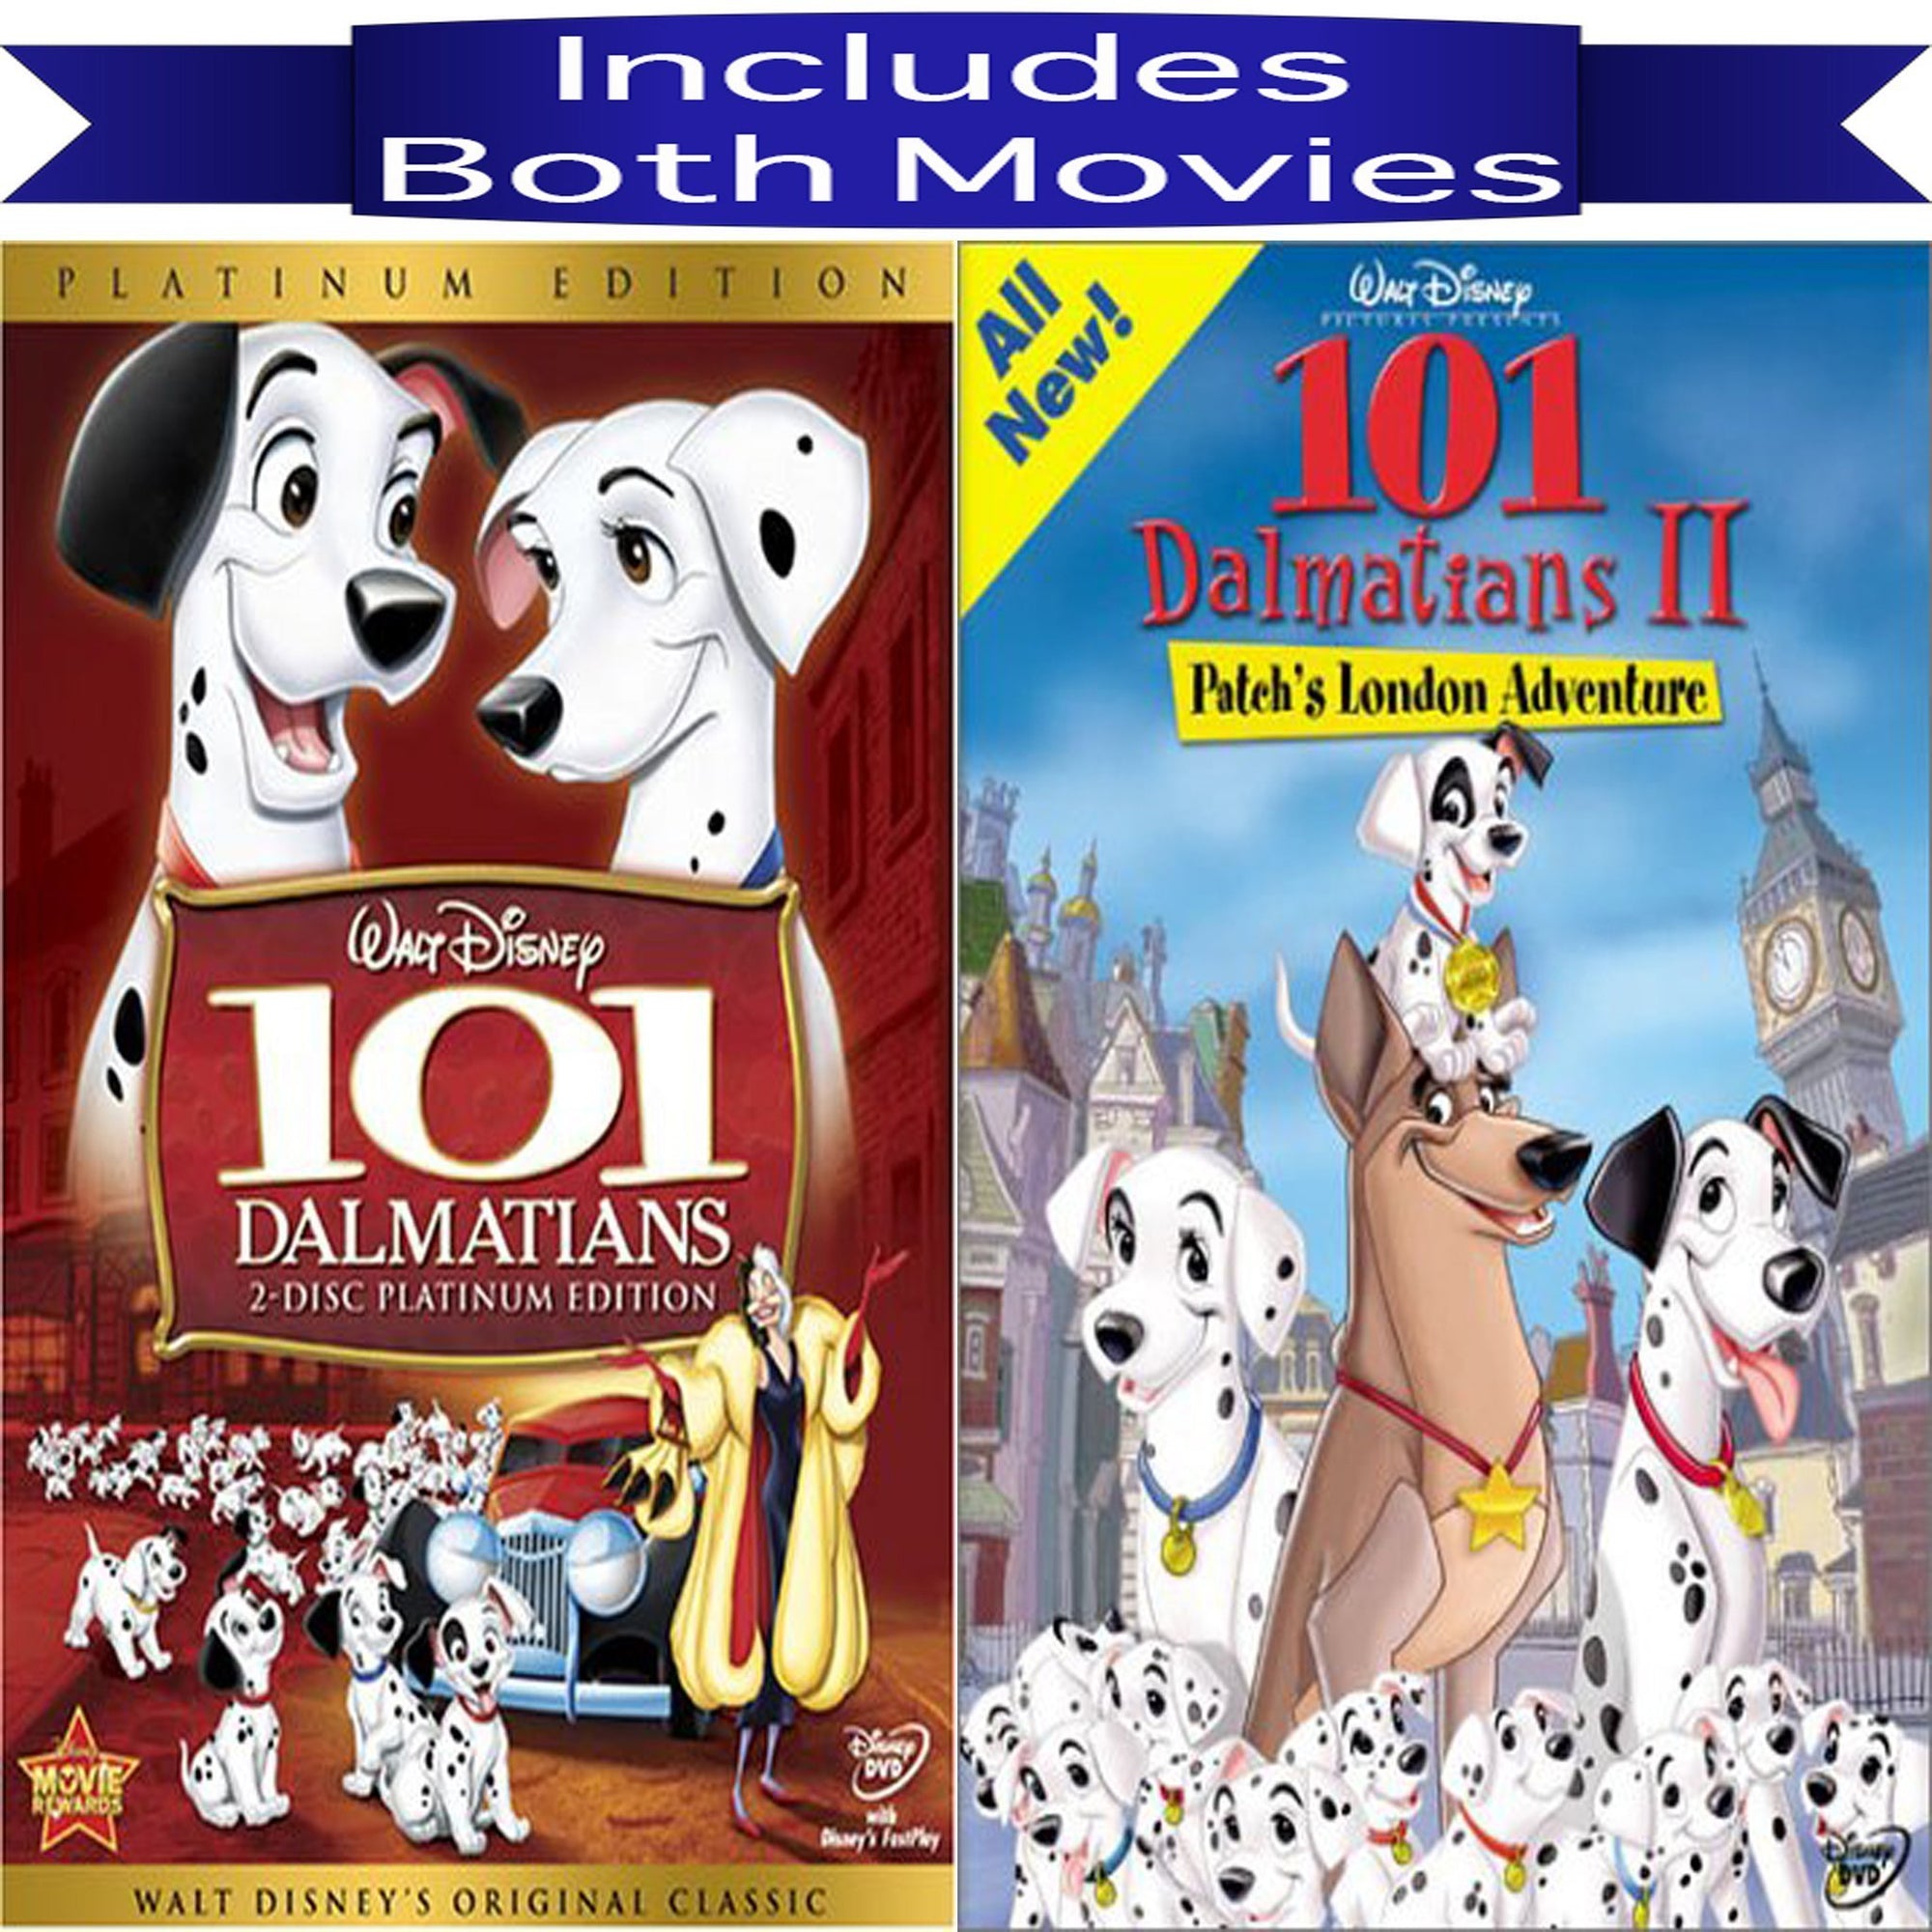 Disney S 101 Dalmatians 1 2 Dvd Set Includes Both Animated Movies